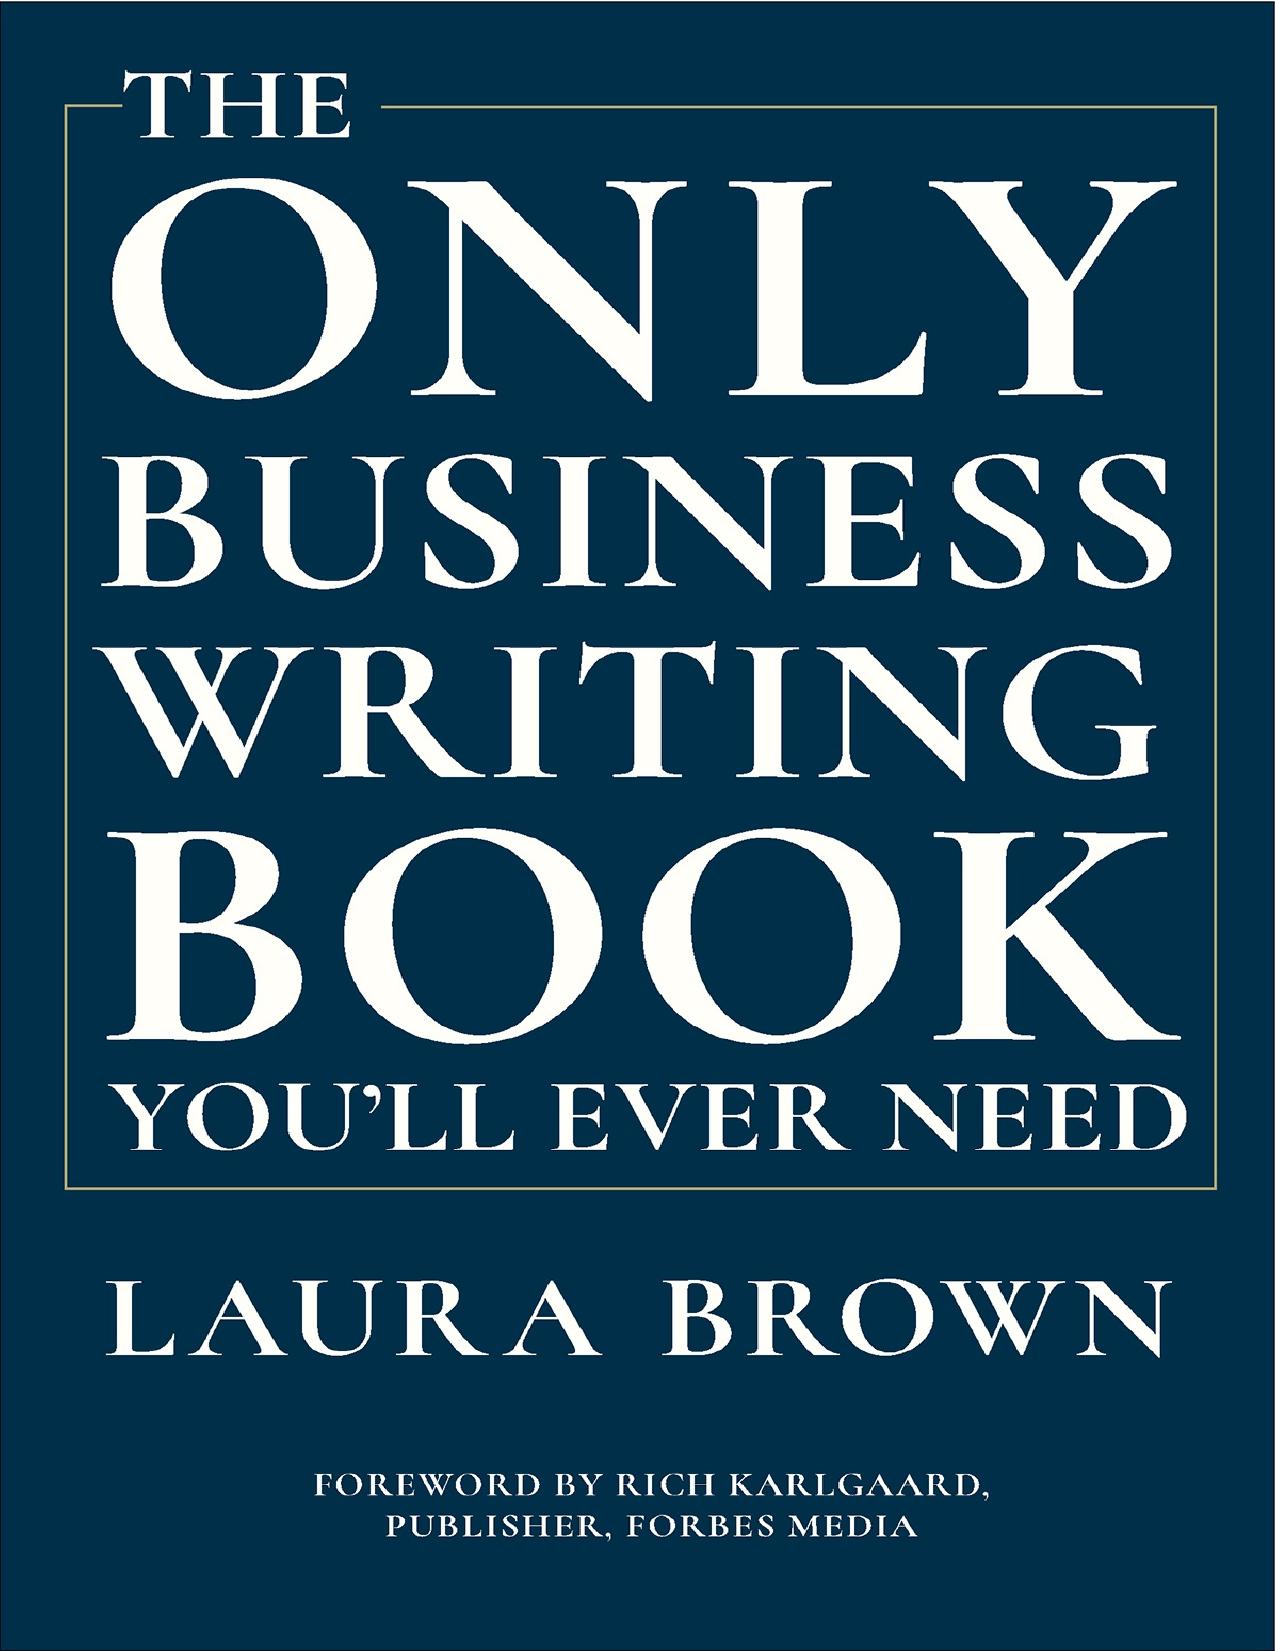 Only Business Writing Book - Laura Brown, The.jpg